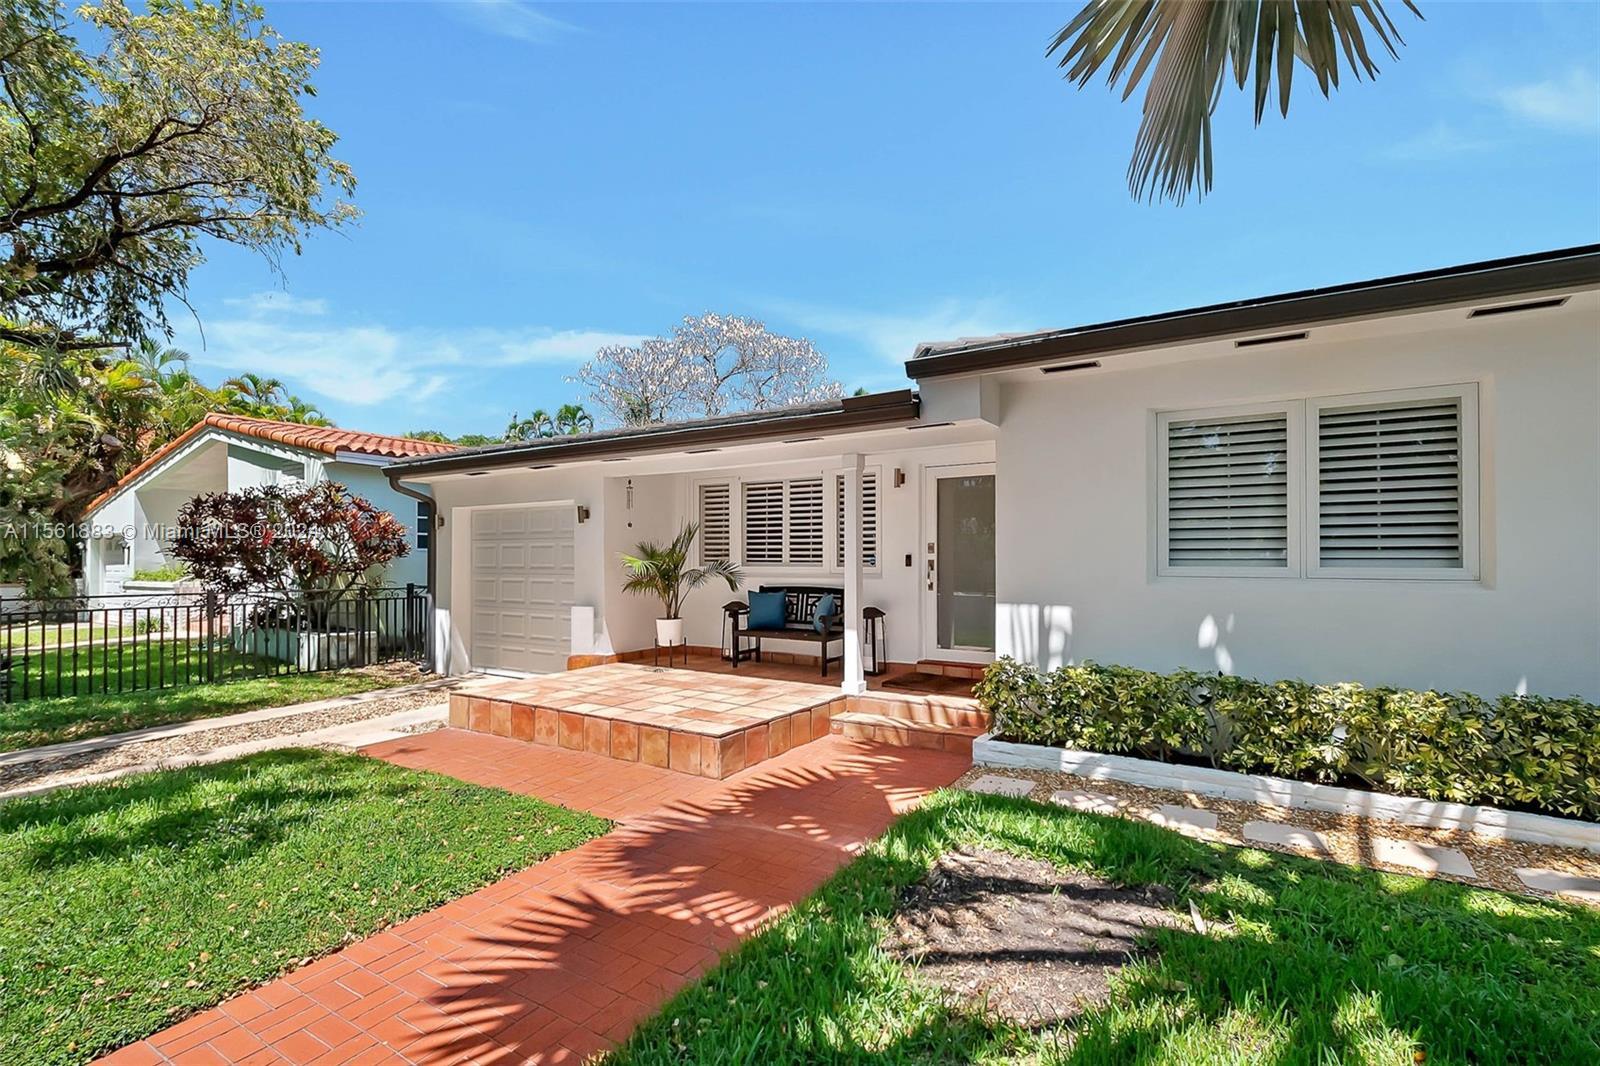 Photo of 1221 Aguila Ave in Coral Gables, FL